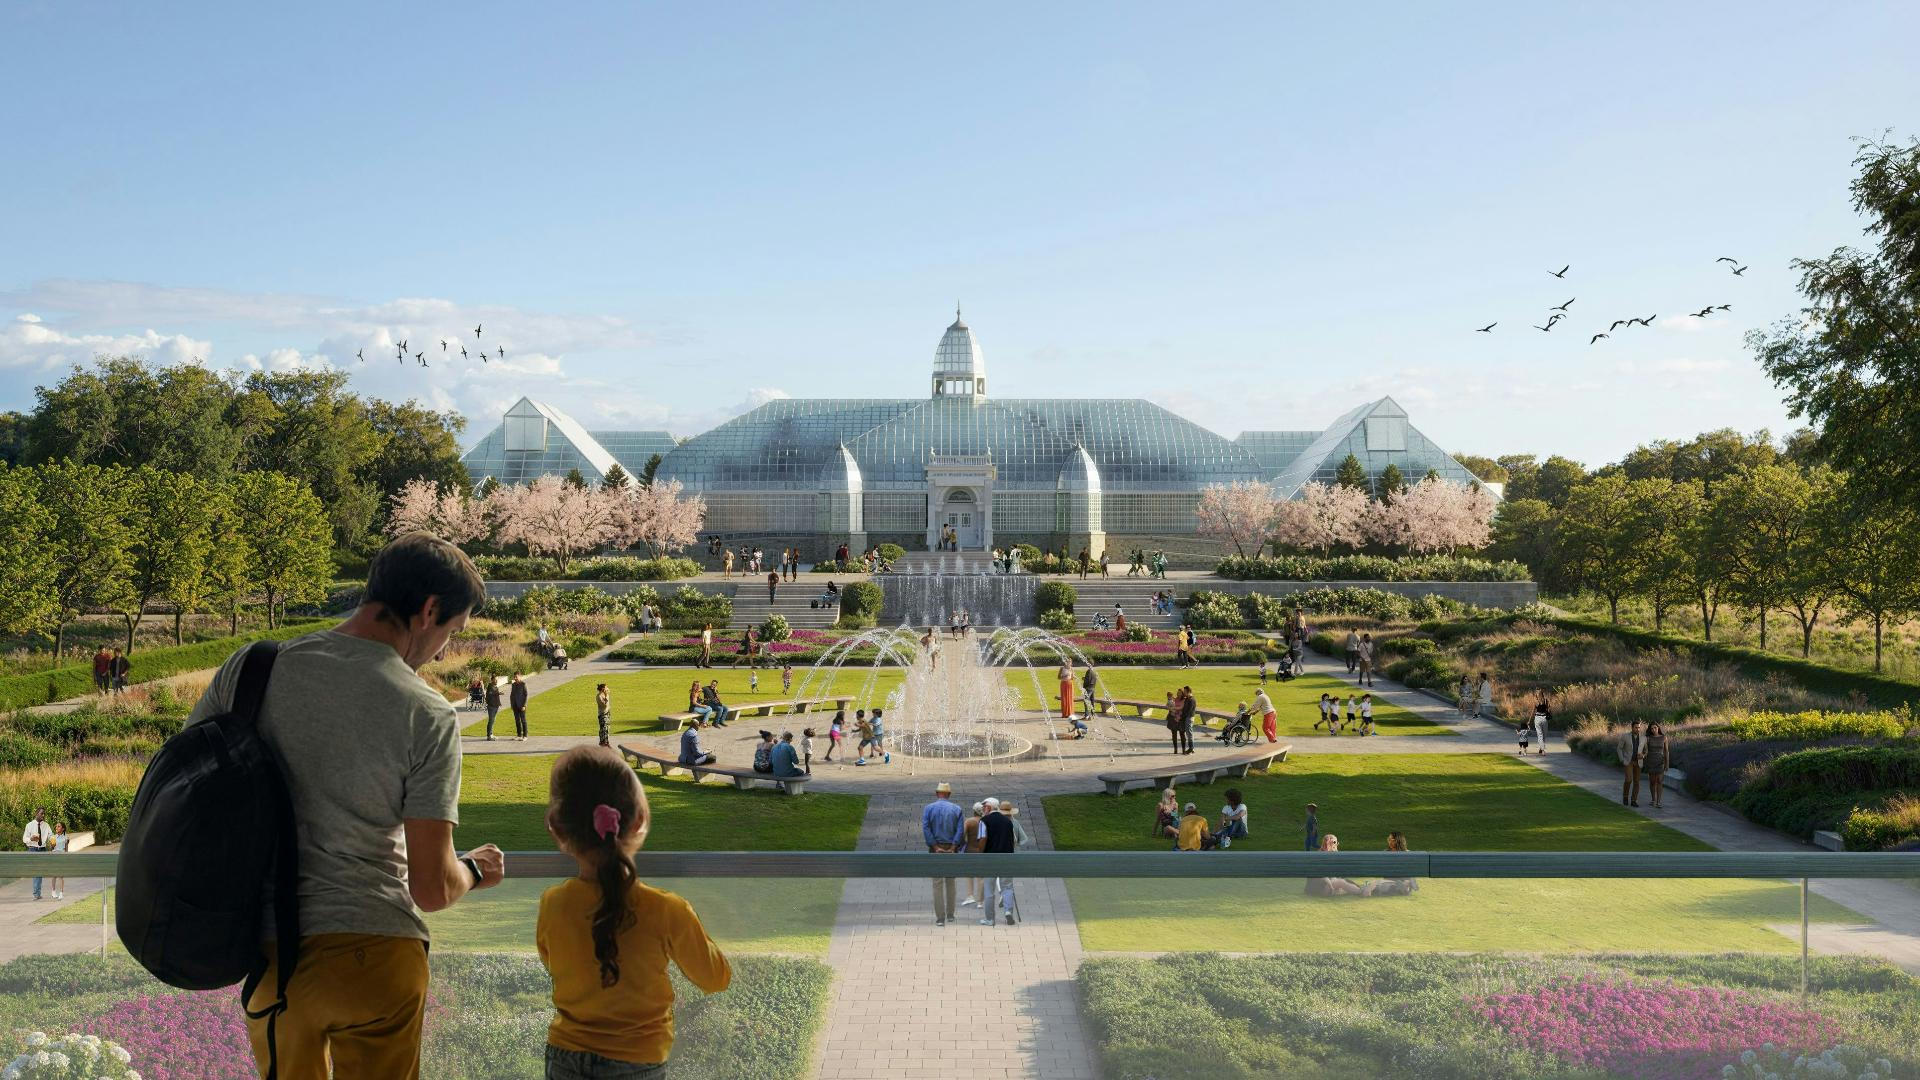 Dubbed the Conservatory's North Star Master Plan, the organization says it includes a mix of new construction and renovation projects.